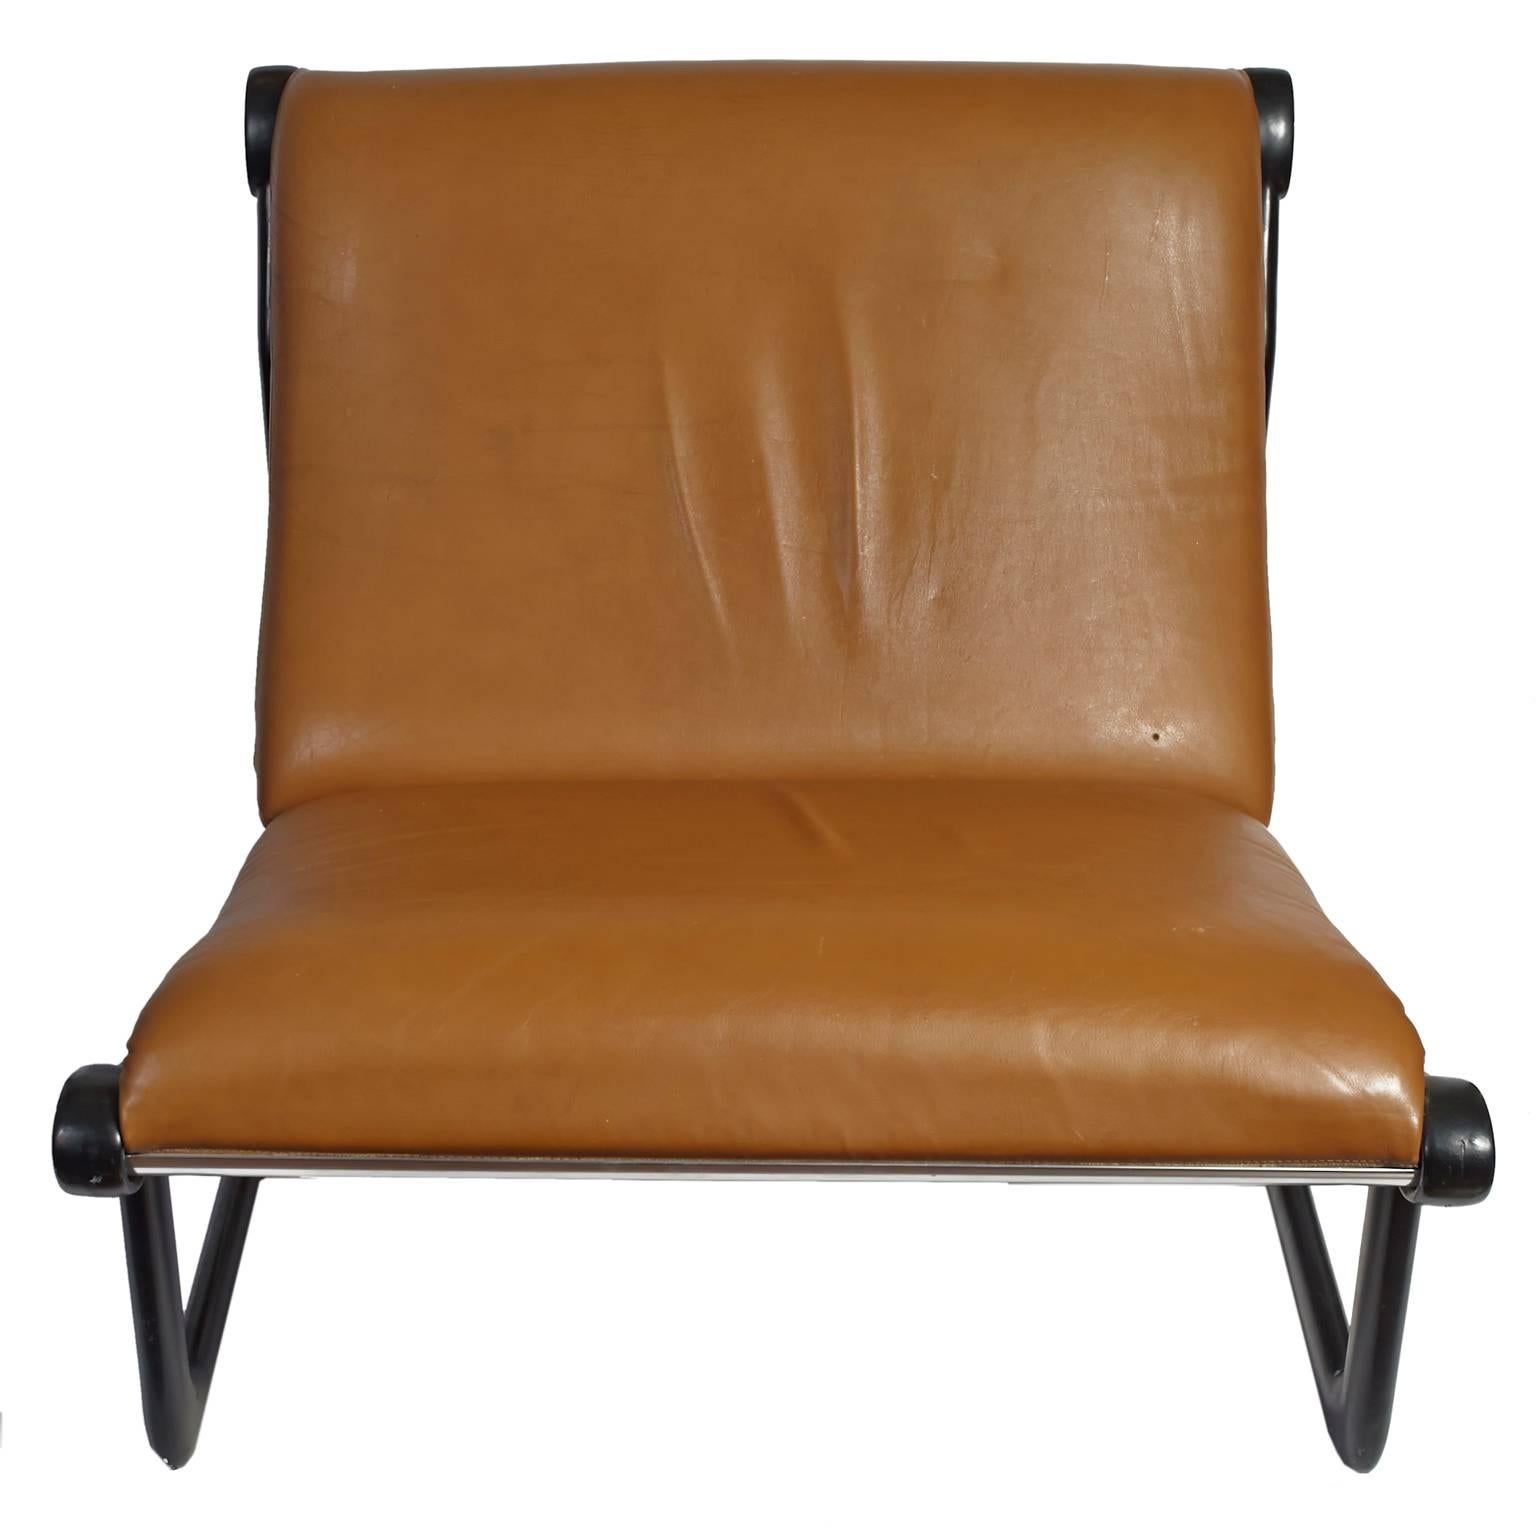 Carmel colored faux leather sling chair by Bruce Hannah and Andrew Morrison for Knoll.
Black powder coated base over aluminium.